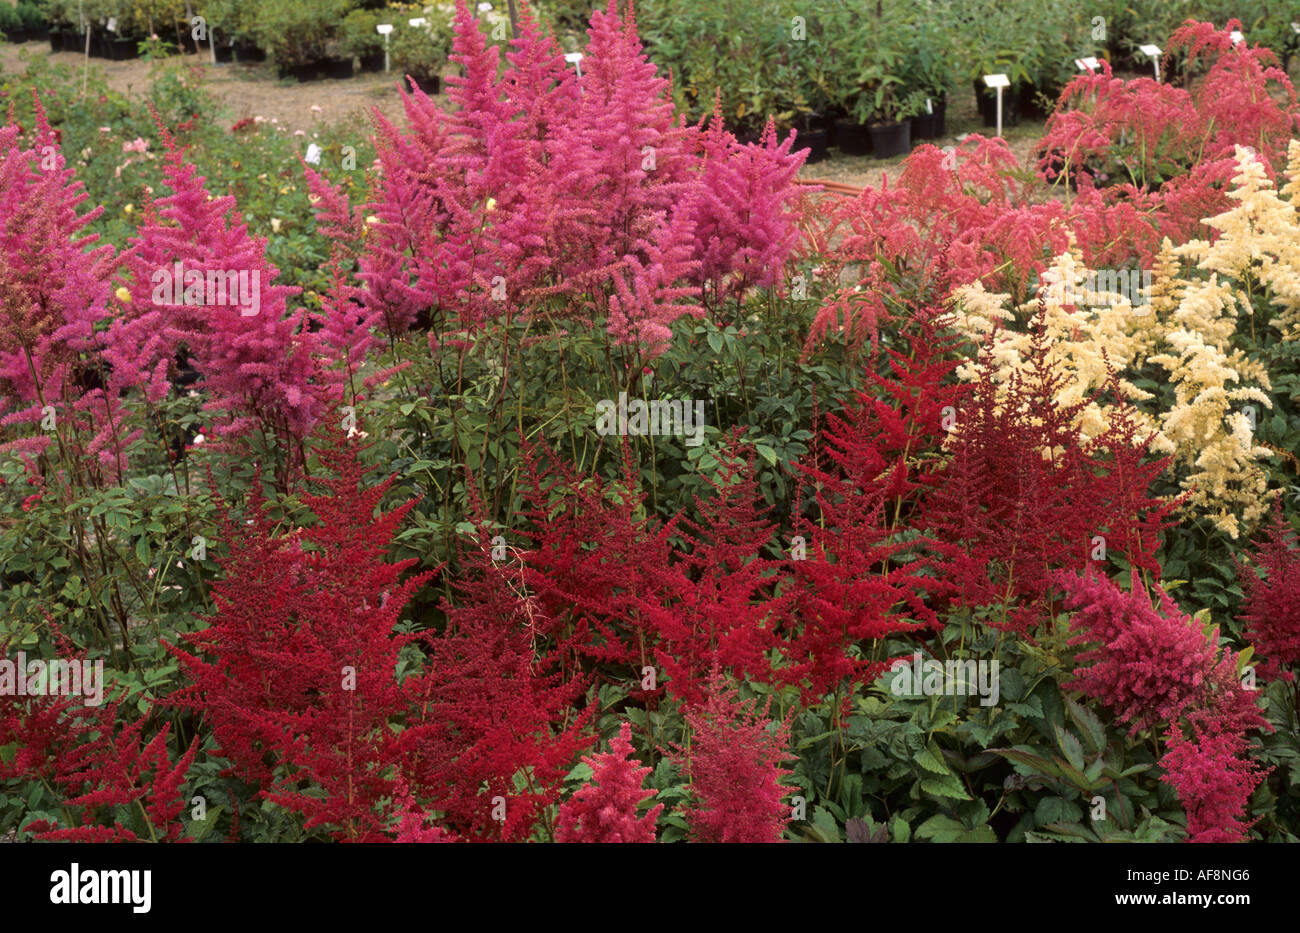 Astlibe, various, at Garden Centre, Plant Sales Stock Photo